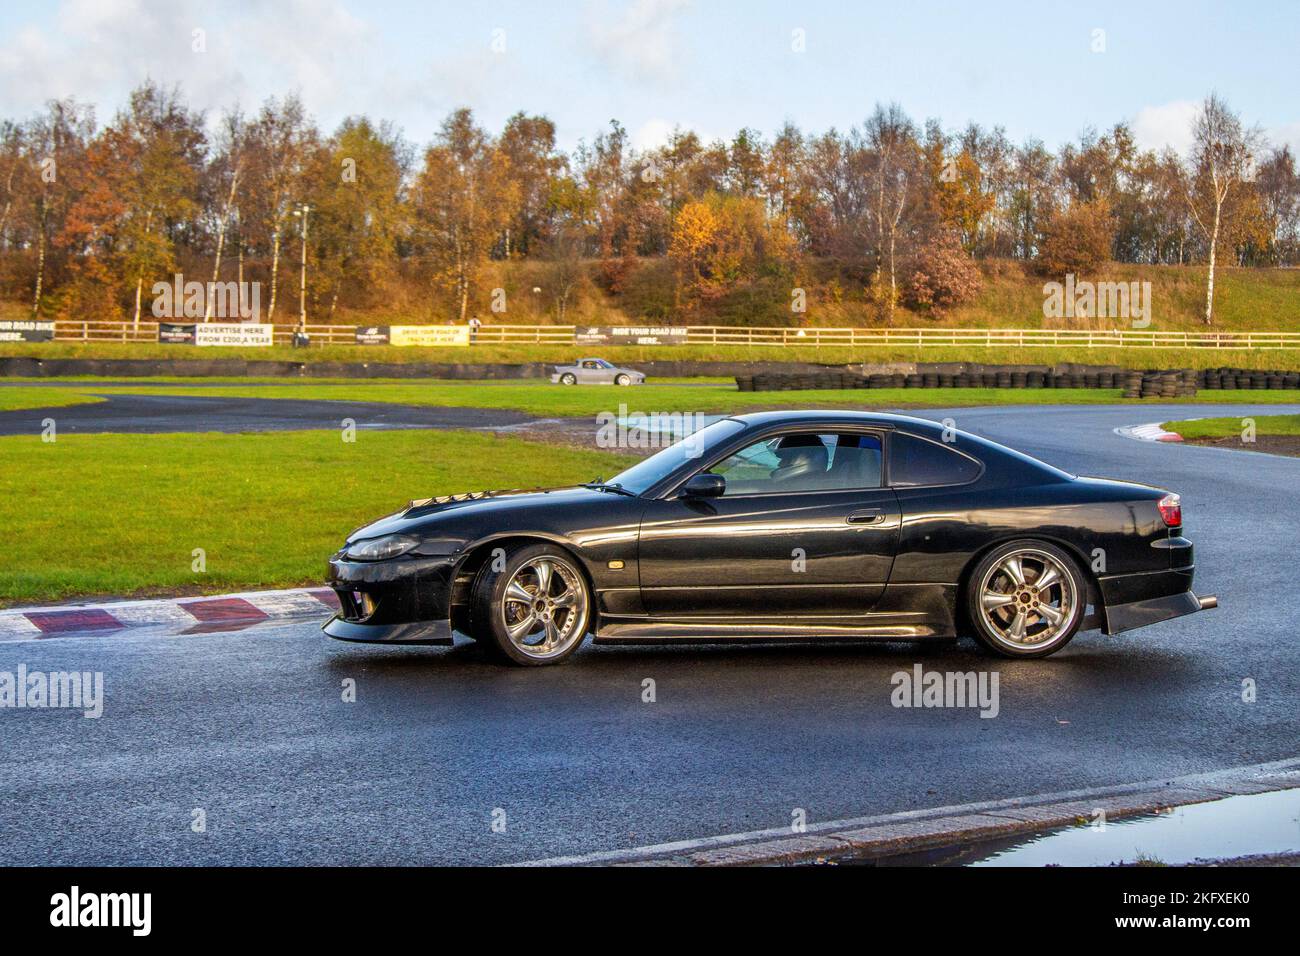 2000 Black NISSAN SILVIA TB TOURING 16C COUPE, 1998cc 5 speed manual; Rear-wheel-drive car, driving on drift tracks and high-speed cornering on wet roads on a Three Sisters Drift Day in Wigan, UK Stock Photo